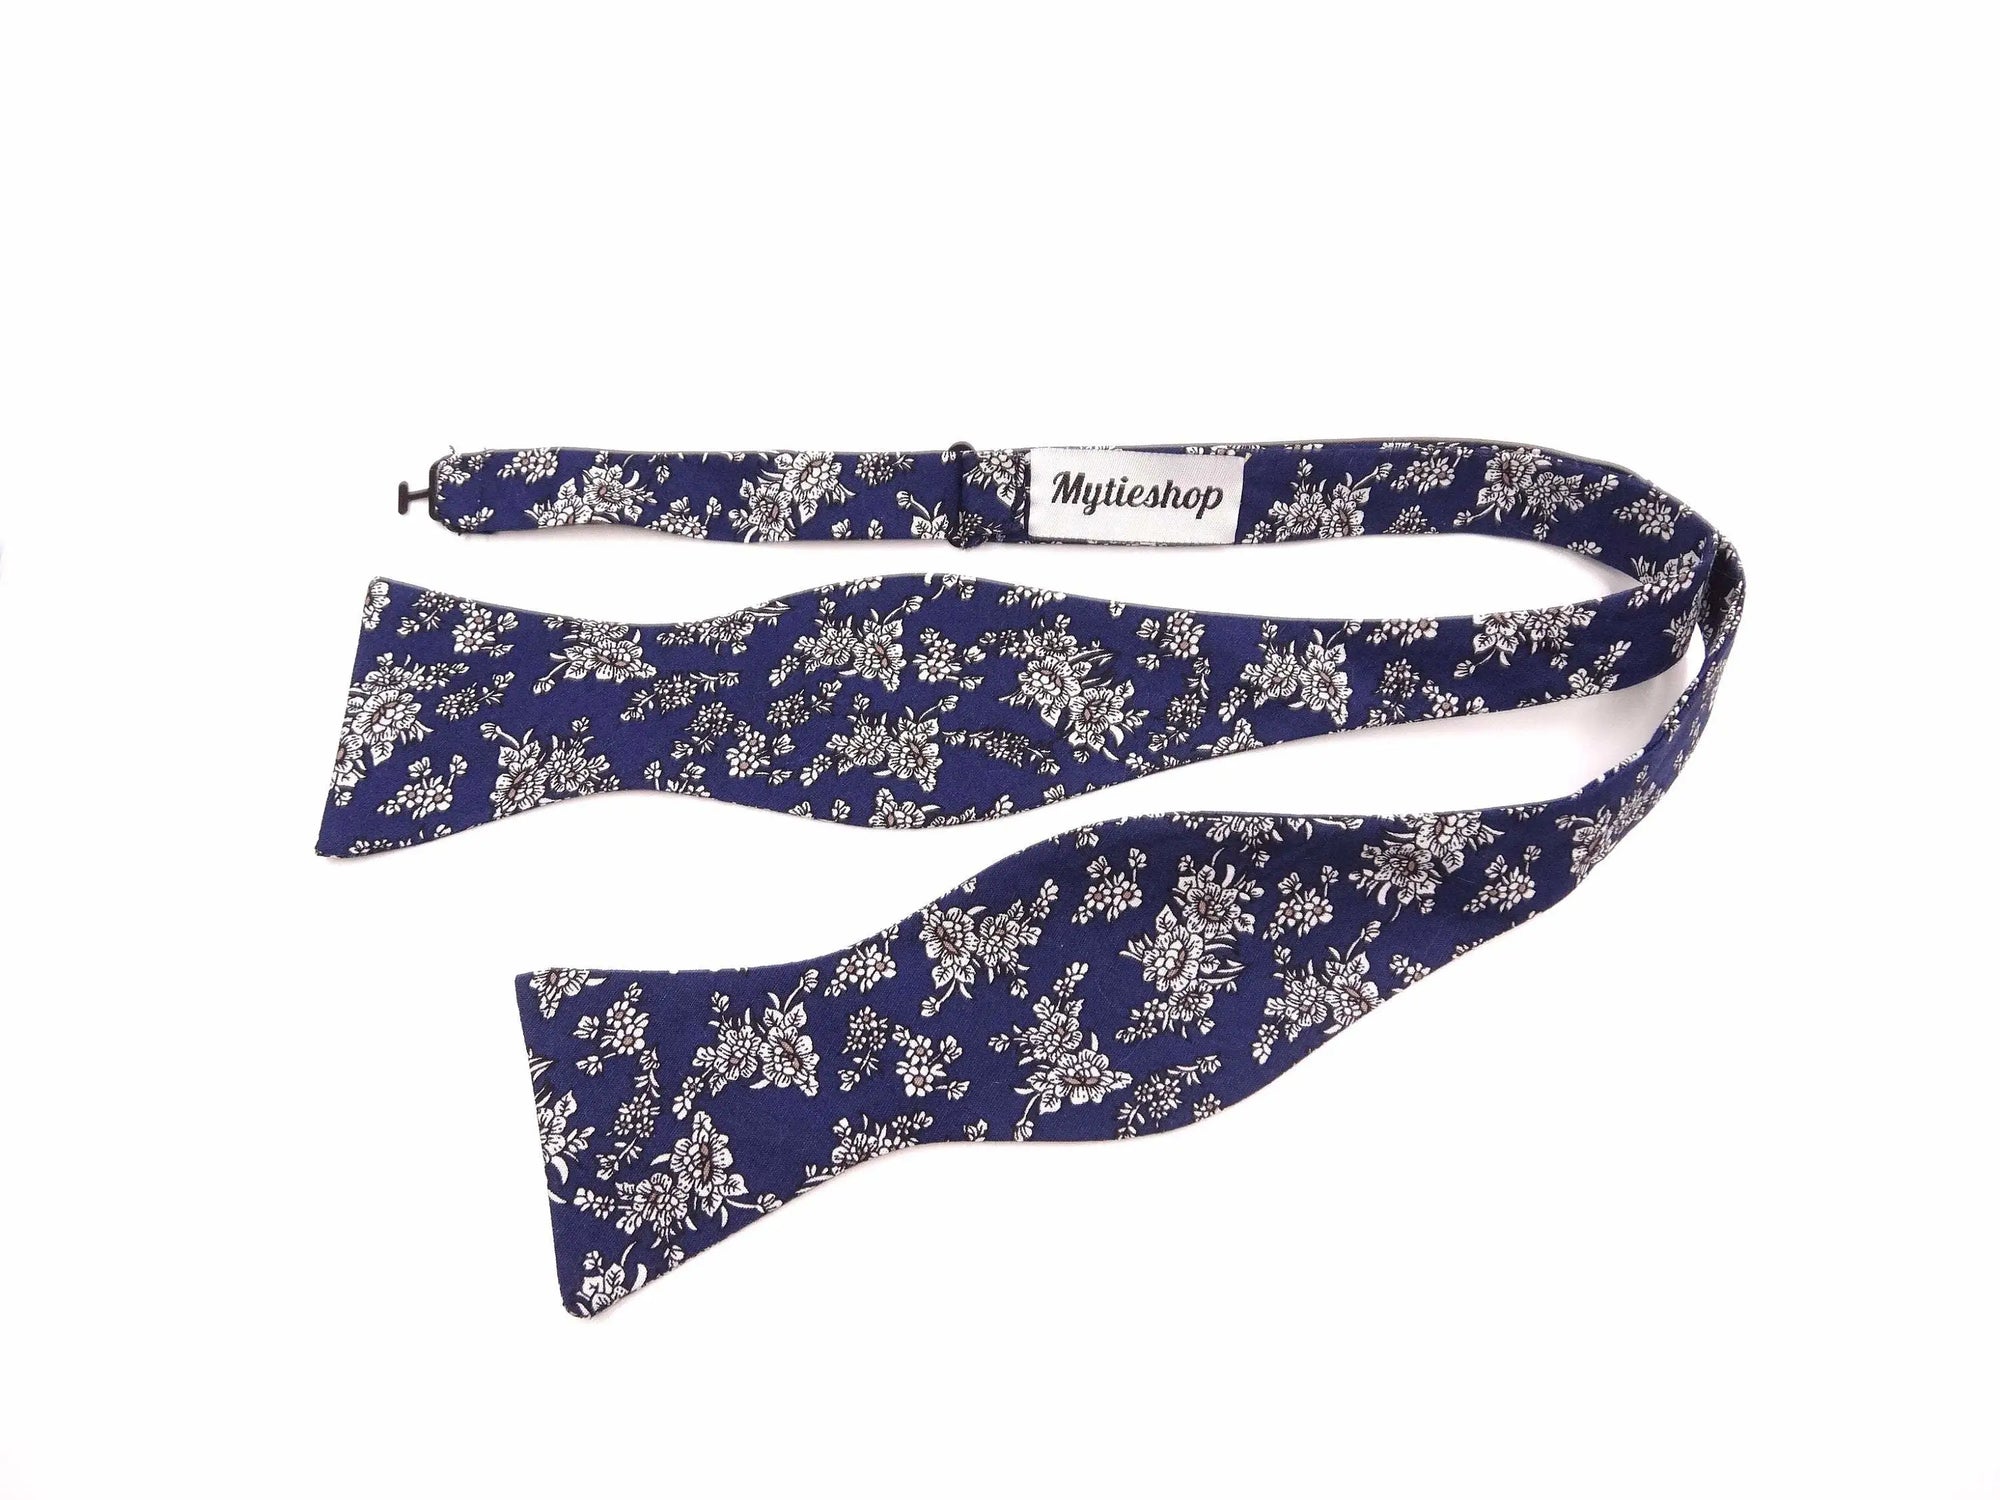 Blue Floral Bow Tie Self Tie OZIAS - MYTIESHOP-Blue Floral Bow Tie Self Tie Ozias Bow Tie 100% Cotton Flannel Handmade Adjustable to fit most neck sizes 13 3/4" - 18" Color: Blue Great for Prom Dinners Interviews Photo shoots Photo sessions Dates Groom to stand out between his Groomsmen pair them up with neckties while he wears the bow tie. Floral self tie bow tie for weddings and events. Great anniversary present and gift. Also great gift for the groom and his groomsmen to wear at the wedding, 